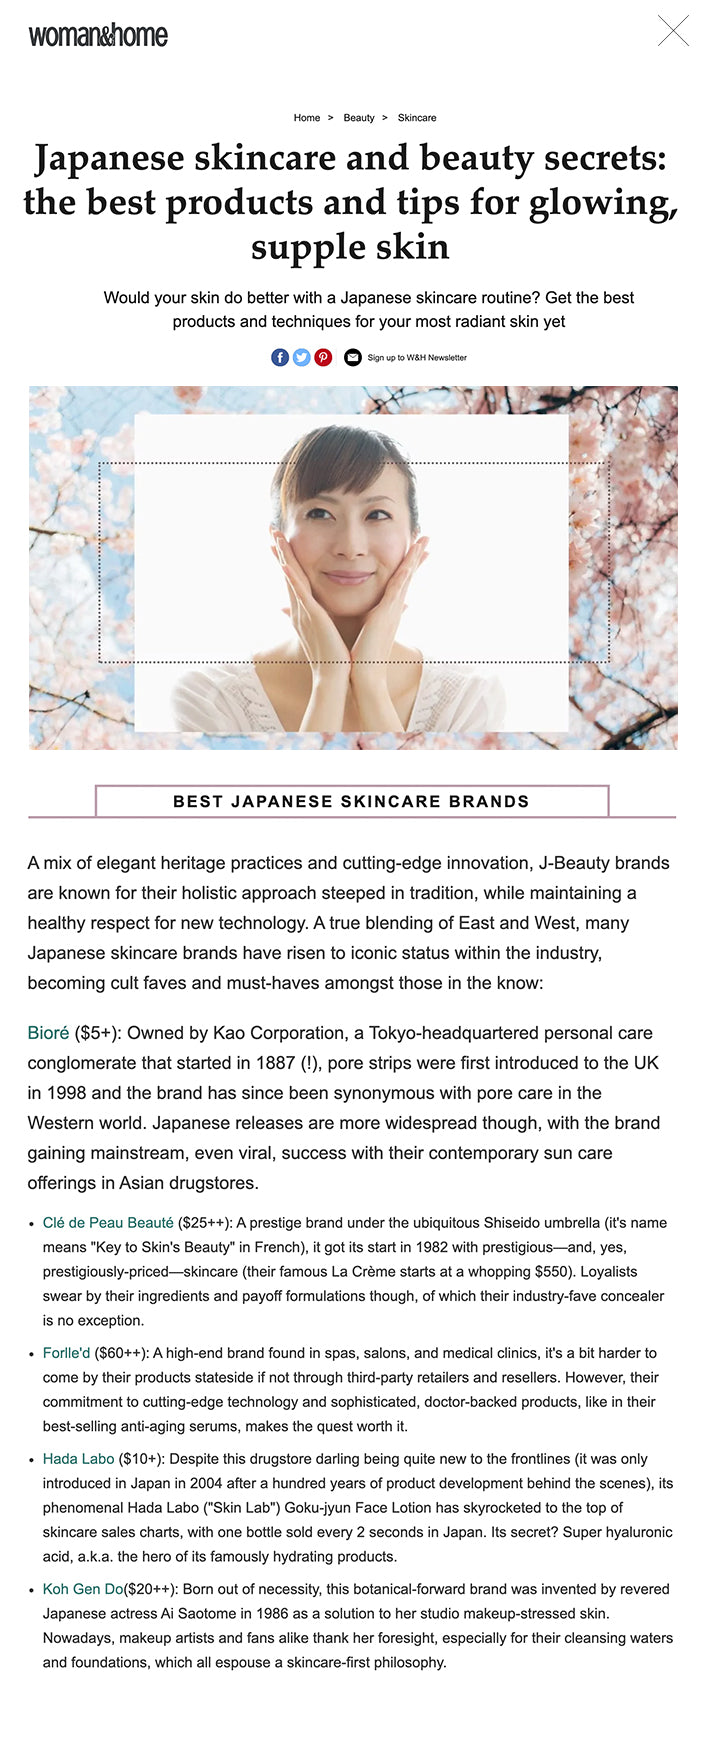 JUMP TO CATEGORY: Japanese skincare ingredients Japanese skincare secrets Best Japanese skincare products Best Japanese skincare brands  Brittany Leitner BY BRITTANY LEITNER , EUNICE LUCERO-LEE MAY 05, 2021  Over the last decade, Japanese skincare has made its way more and more into everyday Western regimens. With a focus on a multi-step routine, lighter formulations (essences, "lotions"), and an emphasis on a gentle, layered approach to hydration, J-Beauty has long taken the world by storm. These are only some of the hallmarks of their particular take on skincare, however, that a lot of us may already be familiar with in our own routines.  What makes it different from the rest? To find out what makes Japanese skincare secrets so effective, as well as how they vary from typical Western practices, woman&home spoke with Elizabeth McCarron and Kat Buckley, skincare experts and members of The Skin Collaborative. They offer insight on how to incorporate these practices into your routine, as well as why exactly a Japanese skincare approach sets itself apart from the rest.   WHAT GOES INTO A JAPANESE SKINCARE ROUTINE? According to Elizabeth, the Japanese skincare approach is all about caring for the skin as a whole, like the vital organ that it is—whereas the Western approach focuses on correcting a certain skin problem, like redness, oily skin, or rosacea. The Japanese “prioritize recreating the ideal conditions for its function, for example, by regulating the electrolytes in and out of the cell, making sure amino acids, microelements, or vitamin deficiencies are corrected in the first place,” Elizabeth says. “And only then will they address ‘local’ problems, such as pigmentation or acne,” she adds.   Kat agrees: “Japanese skincare takes on a luxurious but rather more simple approach to your skin, focusing on cleansing oils, gentle exfoliation, and lightweight essences to hydrate and nourish.”  RECOMMENDED VIDEOS FOR YOU... CLOSE JAPANESE SKINCARE: BEAUTY SECRETS AND TECHNIQUES JAPANESE SKINCARE INGREDIENTS  Elizabeth points out that Japanese skincare is often a unique and happy marriage between both high-tech ingredients and natural, soothing botanicals. Botanicals are often “exposed to a fermentation process that would allow enhancing of the qualities of the ingredients to improve bioavailability,” she says. Among the traditional Japanese ingredients would be the following, which you’ll find in many Japanese skincare products on the market today. These ingredients are known for being rich in antioxidants and supporting the skin’s function and collagen production, says Kat.  Kudzu root: an Asian botanical herb known for its healing and anti-microbial properties; used for skin detoxification, purification, and to encourage an even skin tone  Cordyceps: a rare, expensive mushroom (fungus) known in Asian medicinal circles for its powerful anti-oxidant and anti-inflammatory properties that fight premature aging and reduce free radical damage; has polysaccharides that improve and repair the skin barrier Reishi: another mushroom used in Chinese and Japanese medicine for its anti-oxidant and anti-inflammatory benefits; helps the body synthesize ceramides for more optimum hydration and balanced skin reactivity Chlorella (and other algae): contains omega-3 fatty acids that fight inflammation; stimulates collagen and helps prevent wrinkles Rice bran: an anti-oxidant used for centuries in Asia to soothe, purify, and soften skin while reducing the appearance of pores and fine lines and fade dark spots; rich in vitamin B and vitamin E to help fight against hyperpigmentation and acne Plum, cherry, and Medlar fruit and flower extracts: anti-oxidants, rich sources of vitamin C JAPANESE SKINCARE SECRETS Double cleansing: We may already be double cleansing, but did you know it’s a practice originally rooted in traditional Japanese skincare methods? “Double cleansing is widely used in Asia because of the climate, the typical combination skin type, and because sunscreen is used on a daily basis,” Elizabeth says. “With the first balm cleanser, all the dirt, dust, makeup are ‘lifted’ to later be gently washed off with the second cleanser. Such an approach allows for a deep yet gentle cleansing process and greatly reduces the appearance of comedones.” Double moisturizing: Another technique is double moisturizing, which is far less prevalent in the Western world than double-cleansing. “Double moisturizing is lesser-known,” says Kat. “The use of a hydrating, lightweight essence or tonic (first step) is used to enable effective penetration of serums, and then sealed in with a luxurious, hydrating moisturizer (second step), which tends to be more personalized to your skin in a similar fashion to Western skincare,” she explains. BEST JAPANESE SKINCARE PRODUCTS Image DHC Deep Cleansing Oil  Using an oil as a cleanser originated from Japanese skincare culture and dates back to 1967. This should be the first step of your double cleansing routine. Use an oil cleanser to remove sunscreen, makeup, dirt, and impurities, and follow up with a foaming cleanser to ensure a thorough wash.  DHC Deep Cleansing Oil at Amazon for $15.56 Image Hada Labo Tokyo Gentle Hydrating Cleanser  This cleanser from this beloved Japanese drugstore brand is unscented and infused with super hyaluronic acid, which the brand says is twice as hydrating as regular hyaluronic acid. It?s even good for sensitive skin, as it?s free of alcohol, fragrances, sulfates, parabens, and dyes.  Hada Labo Tokyo Gentle Hydrating Cleanser at Amazon for $9.99 Image SK-II Facial Treatment Clear Lotion  In Japanese skincare, ?lotions? are typically watery skin conditioners and act as mega-hydrators to soften and plump skin. This toner by SK-II does just that and is good for all skin types.   SK-II Facial Treatment Clear Lotion Toner at Amazon for $106.88 Image Forlle'd Hyalogy P Effect Refining Lotion  ?We love Forlle?d because it?s one of the very few Japanese brands that actually has published scientific research about all of its technology, efficiency, and results,? says Elizabeth.  Forlle'd Hyalogy P Effect Refining Lotion at Amazon for US$152.90 Image Shiseido Haku Melano Focus Serum  Asians are prone to hyperpigmentation as they age, and as such, go to great lengths to prevent it with sun care and powerful spot inhibitors. This best-seller from Shiseido suppresses melanin generation for clearer, brighter, more radiant skin.  Shiseido Haku Melano Focus Serum at Amazon for $129 Image Naturie Hatomugi Skin Conditioning Gel  Japan's hot and humid summers have paved the way for lightweight, gel-based moisturizers that can be layered comfortably between a lotion, serum, and sunscreen. This is a winning, superbly hydrating pick that's also great for acne-prone skin.  Naturie Hatomugi Skin Conditioning Gel at Amazon for $12.50 Image Bioré UV Aqua Rich Watery Essence SPF 50+ PA ++++  When it comes to sunscreen, forget all others and pick up this beauty staple in J-Beauty sun protection. From the non-sticky, watery feel that settles nicely under makeup to the high SPF made for either beach or city stressors, this waterproof formula is a cult pick for good reason (did we mention it also has hyaluronic acid?).  Biore UV Aqua Rich Watery Essence SPF 50+ PA ++++ at Amazon for $14.84 BEST JAPANESE SKINCARE BRANDS  A mix of elegant heritage practices and cutting-edge innovation, J-Beauty brands are known for their holistic approach steeped in tradition, while maintaining a healthy respect for new technology. A true blending of East and West, many Japanese skincare brands have risen to iconic status within the industry, becoming cult faves and must-haves amongst those in the know:  Bioré ($5+): Owned by Kao Corporation, a Tokyo-headquartered personal care conglomerate that started in 1887 (!), pore strips were first introduced to the UK in 1998 and the brand has since been synonymous with pore care in the Western world. Japanese releases are more widespread though, with the brand gaining mainstream, even viral, success with their contemporary sun care offerings in Asian drugstores. Clé de Peau Beauté ($25++): A prestige brand under the ubiquitous Shiseido umbrella (it's name means "Key to Skin's Beauty" in French), it got its start in 1982 with prestigious—and, yes, prestigiously-priced—skincare (their famous La Crème starts at a whopping $550). Loyalists swear by their ingredients and payoff formulations though, of which their industry-fave concealer is no exception. Forlle'd ($60++): A high-end brand found in spas, salons, and medical clinics, it's a bit harder to come by their products stateside if not through third-party retailers and resellers. However, their commitment to cutting-edge technology and sophisticated, doctor-backed products, like in their best-selling anti-aging serums, makes the quest worth it.  Hada Labo ($10+): Despite this drugstore darling being quite new to the frontlines (it was only introduced in Japan in 2004 after a hundred years of product development behind the scenes), its phenomenal Hada Labo ("Skin Lab") Goku-jyun Face Lotion has skyrocketed to the top of skincare sales charts, with one bottle sold every 2 seconds in Japan. Its secret? Super hyaluronic acid, a.k.a. the hero of its famously hydrating products. Koh Gen Do($20++): Born out of necessity, this botanical-forward brand was invented by revered Japanese actress Ai Saotome in 1986 as a solution to her studio makeup-stressed skin. Nowadays, makeup artists and fans alike thank her foresight, especially for their cleansing waters and foundations, which all espouse a skincare-first philosophy. Kosé ($25++): This 70-year-strong beauty umbrella handles a slew of personal care brands ranging in price points, but their star line Sekkisei, which centers around advanced skincare technologies, is what fans write home about. Japanese and Chinese herbal extracts form the core of their lines, which all aim to deliver radiant, "naked, translucent skin as clear as snow." Shiseido($20++): Founded in 1872 by naval pharmacist Arinobu Fukuhara, Shiseido is proudly one of, if not the oldest cosmetics companies in Japan (and the world). Everything from its ground-breaking smart makeup (their Synchro Skin foundations appear in many a beautyphile's list) to its heritage skincare and sun care lines has made waves globally, due to their constant product innovations and exceptional R&D.  shu uemura($12++): "Beautiful makeup starts with beautiful skin"—visionary founder and makeup artist Shu Uemura certainly walked the walk too, as his cleansing oil, which launched in 1960, changed the way the world approached face-washing forever. Another household name is their beloved (and The Devil Wears Prada-flexed) eyelash curler, along with their unique Hard Product brow pencils and fun, modern, and pop culture-collaborative color palettes. SK-II($95++): Launched in the early 1980s as Max Factor's (now Procter & Gamble's) solution to premium Asian skincare, SK-II makes no qualms about being a targeted, high-end approach to beauty solutions. At the heart of the brand—and the reason for all the justified buzz—lies their proprietary skin-revolutionizing ingredient Pitera, which is highlighted to the fore in their star product, the much-coveted Facial Treatment Essence. What we enjoy in brightening and anti-aging, we owe only to the enterprising sake brewers and scientists who discovered this miraculous Asian yeast extract. THREE($30++): "Natural, honest, creative" and "mind, body, skin" are only two of the holistic-themed missives from the label named after the symbol of creation, deemed Japan's best-selling natural beauty brand. Expect plant-based ingredients and essential oils infused into their super-chic offerings, which pretty robustly extends to men's, lifestyle, home, and intimate care as well. woman&home thanks Elizabeth McCarron and Kat Buckley of The Skin Collaborative for their time and expertise.  The significant reason Kate Middleton might not attend Princess Diana’s statue unveiling alongside Prince William according to a royal expert Kate Middleton may not make an appearance after all womanandhome.com Figs Womens Jade Rafaela™ - Mandarin Collar Scrub Top $38 FIGS | Sponsored Figs Womens Jade Zamora™ - Jogger Scrub Pants $48 FIGS | Sponsored Chrissy Metz, 39, Shows Off Massive Weight Loss In Fierce New Photo Swift Verdict | Sponsored 4 Sisters Take The Same Picture For 40 Years. Don't Cry When You See The Last One! Past Factory | Sponsored Oprah Winfrey reveals the surprising reason she can’t be Lilibet’s godmother womanandhome.com